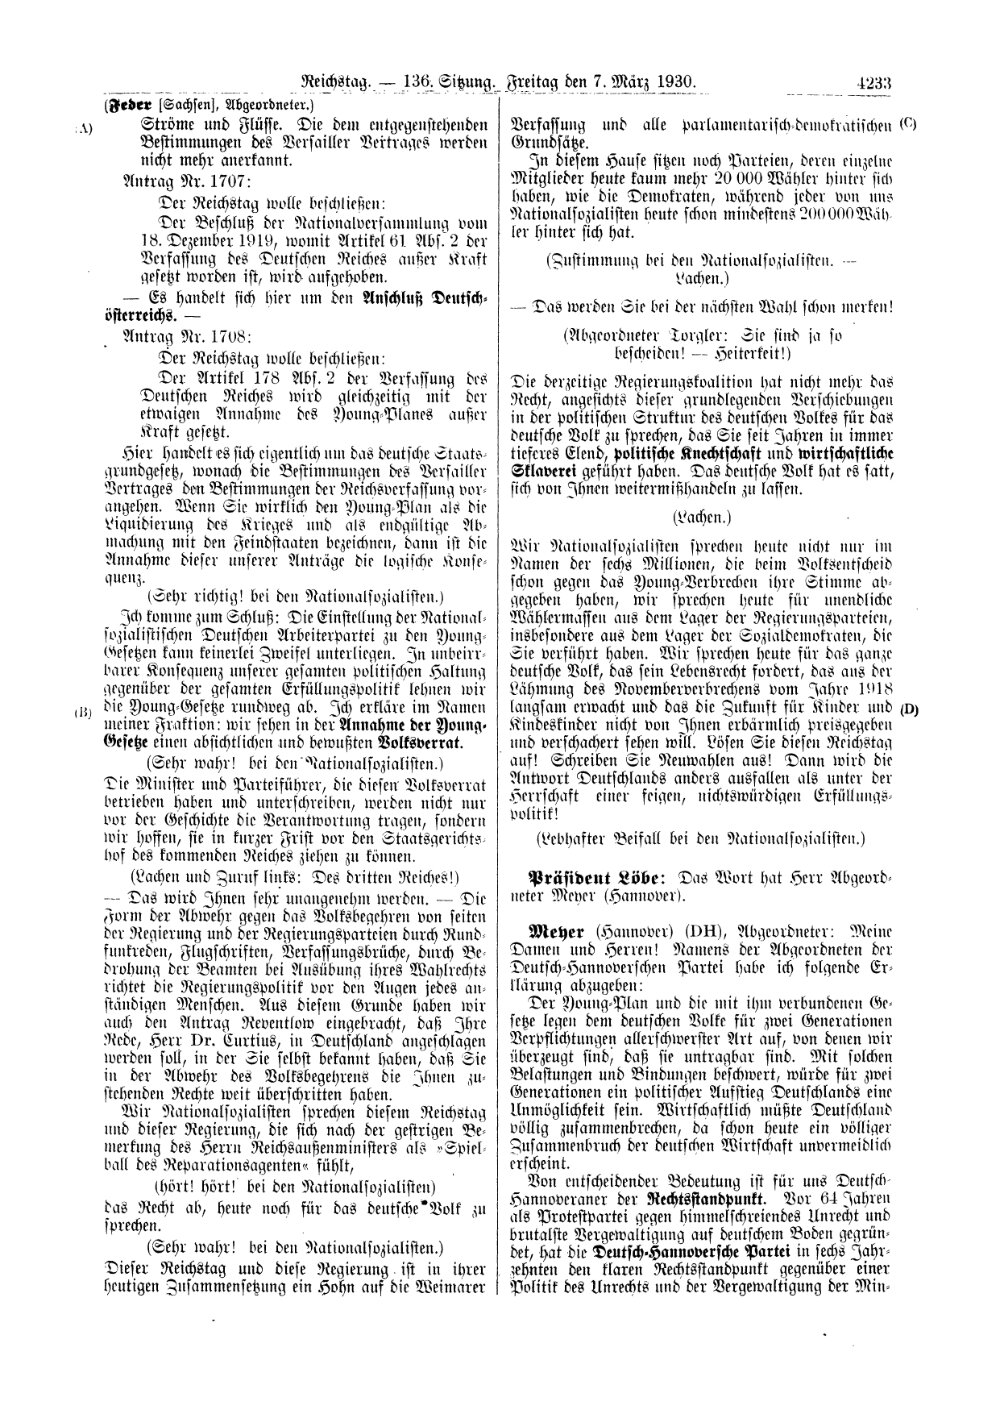 Scan of page 4233